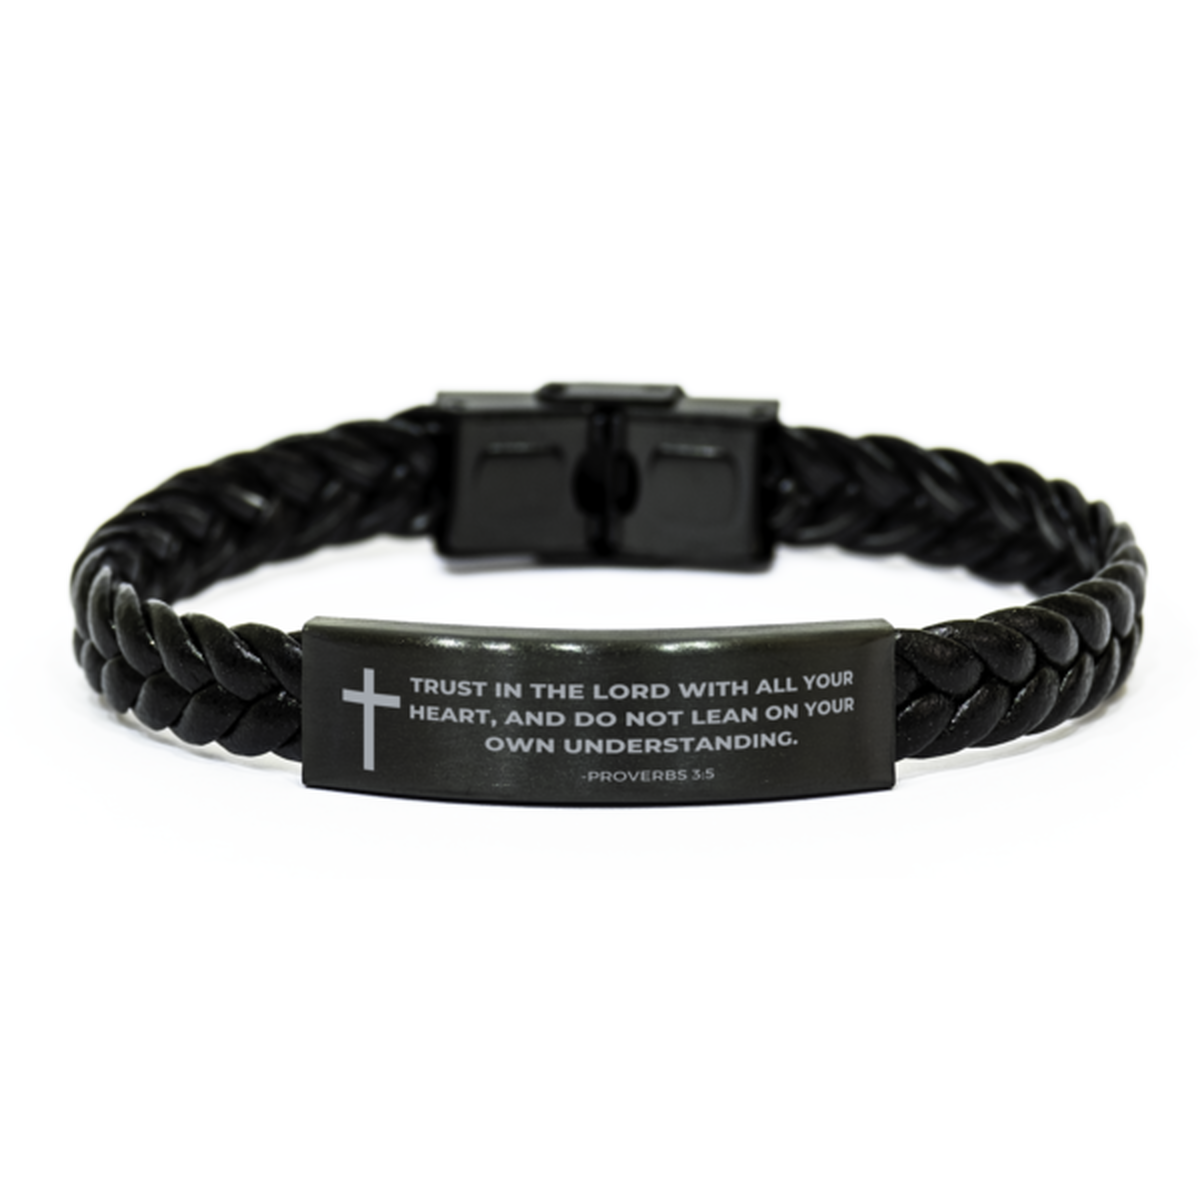 Baptism Gifts For Teenage Boys Girls, Christian Bible Verse Braided Leather Bracelet, Trust in the Lord with all your heart, Catholic Confirmation Gifts for Son, Godson, Grandson, Nephew